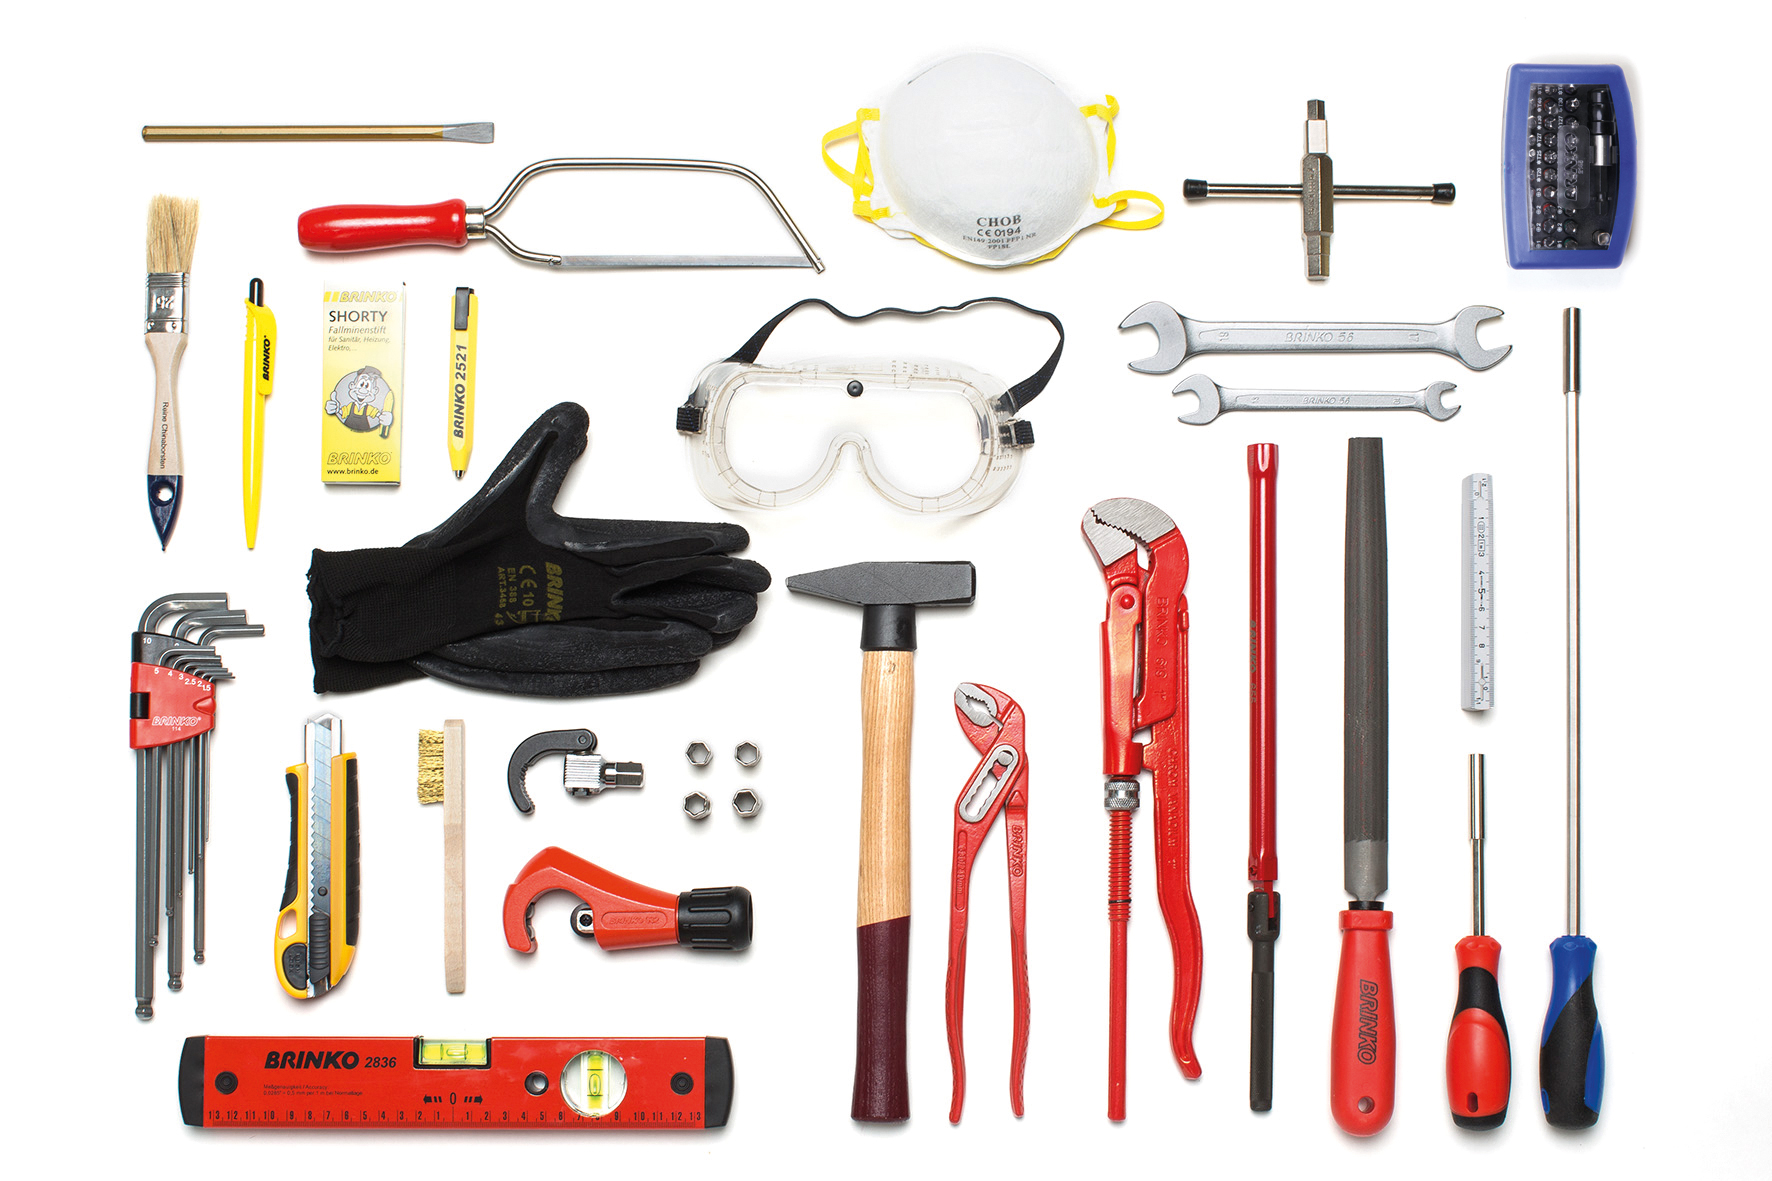 Tips For Organizing And Maintaining Your Plumbing Tool Set - Ibbycuba